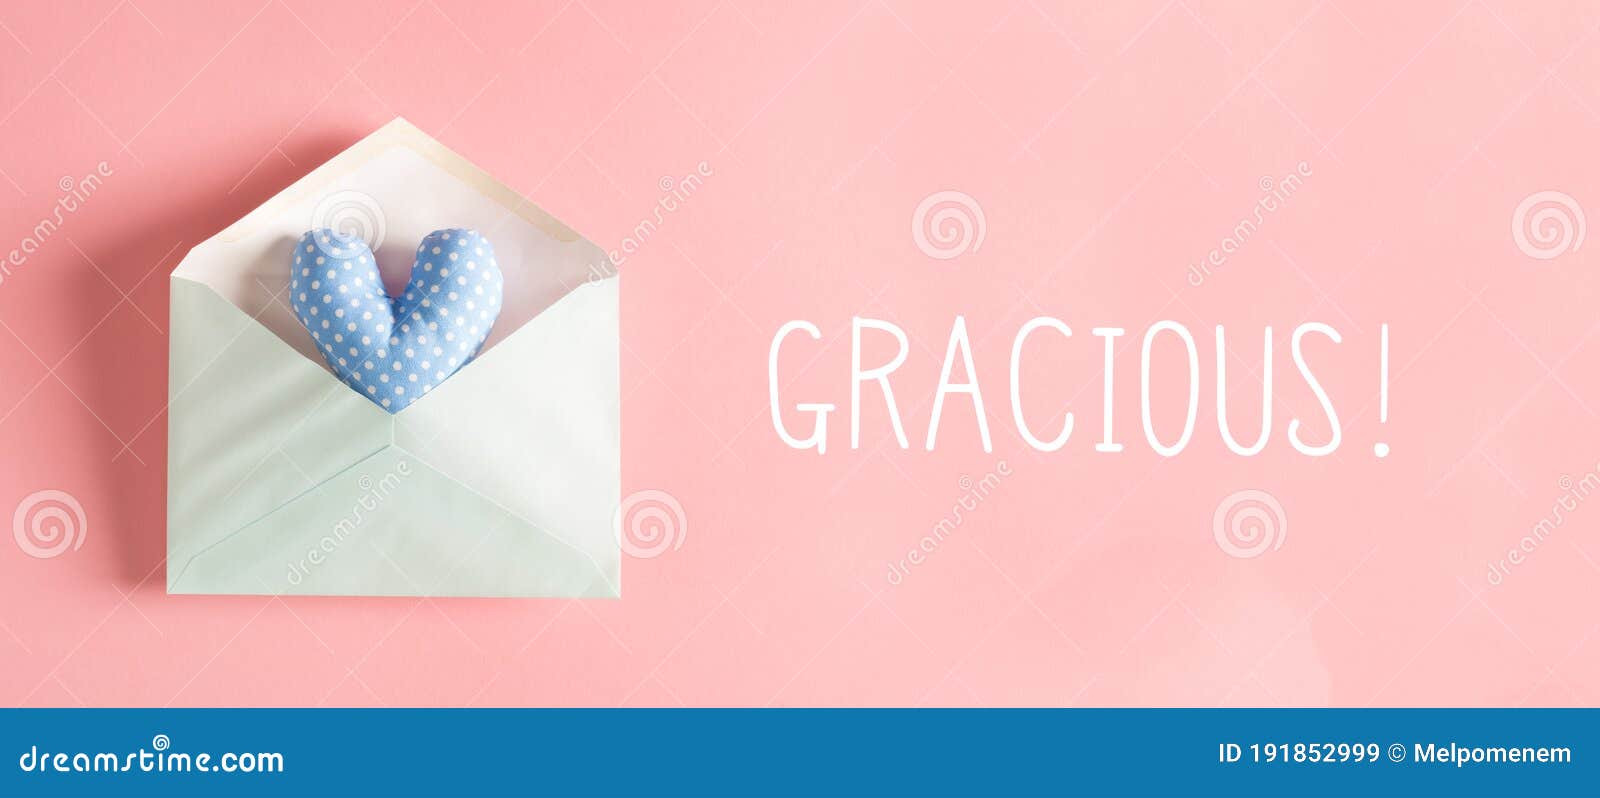 Gracious - Thank You In Spanish Language With A Heart Cushion In An ...
